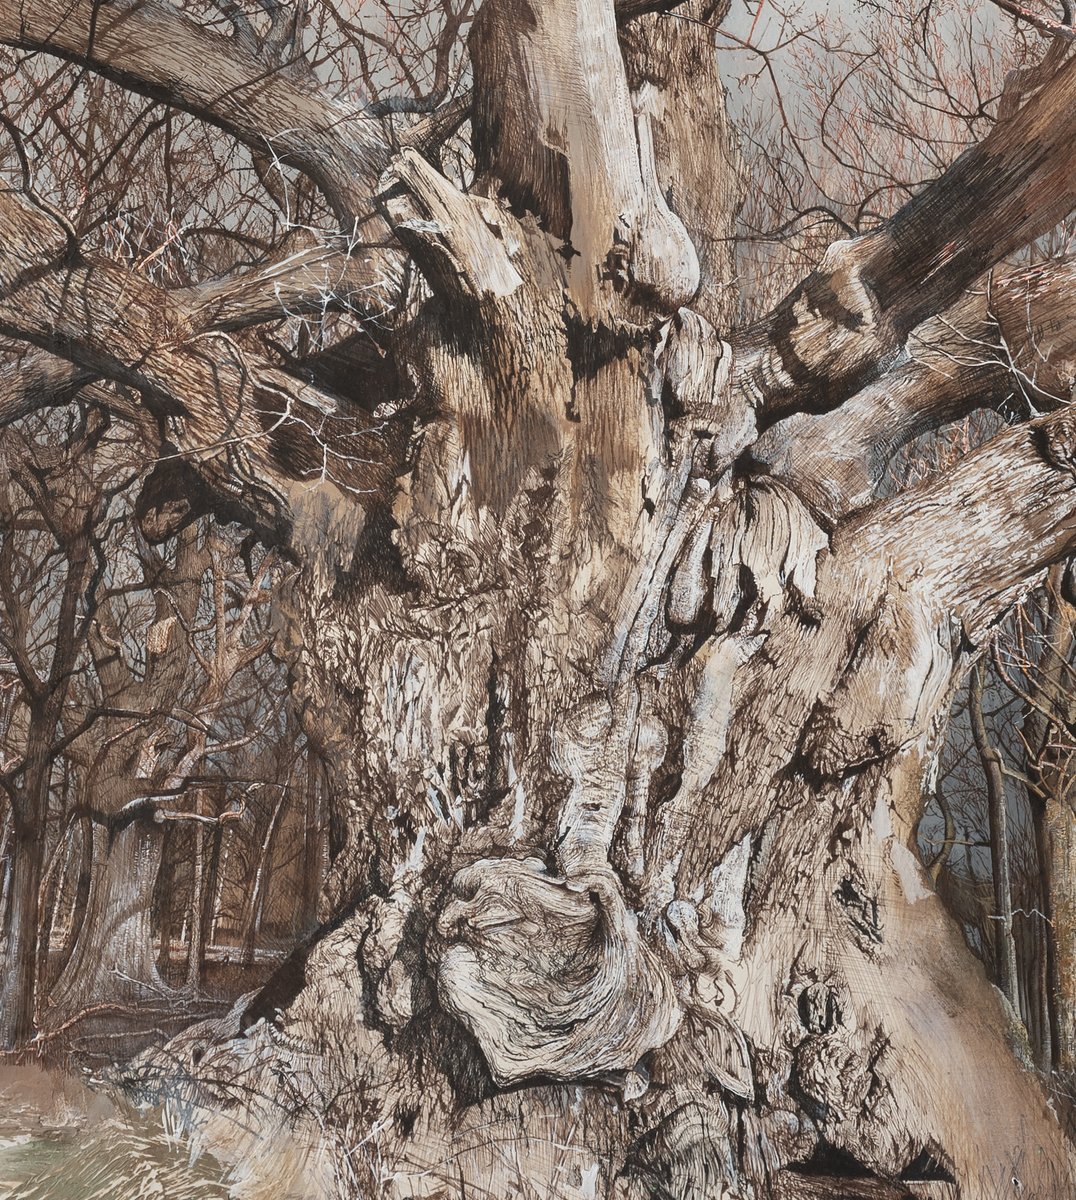 Detail from my painting of the gnarled and fissured bark of the 1000 yr old Windsor Signing oak. Sepia pen &ink, watercolour, gesso, egg tempera
#oak #trees #drawing #landscape #windsorgreatpark #painting #climatecatastrophe